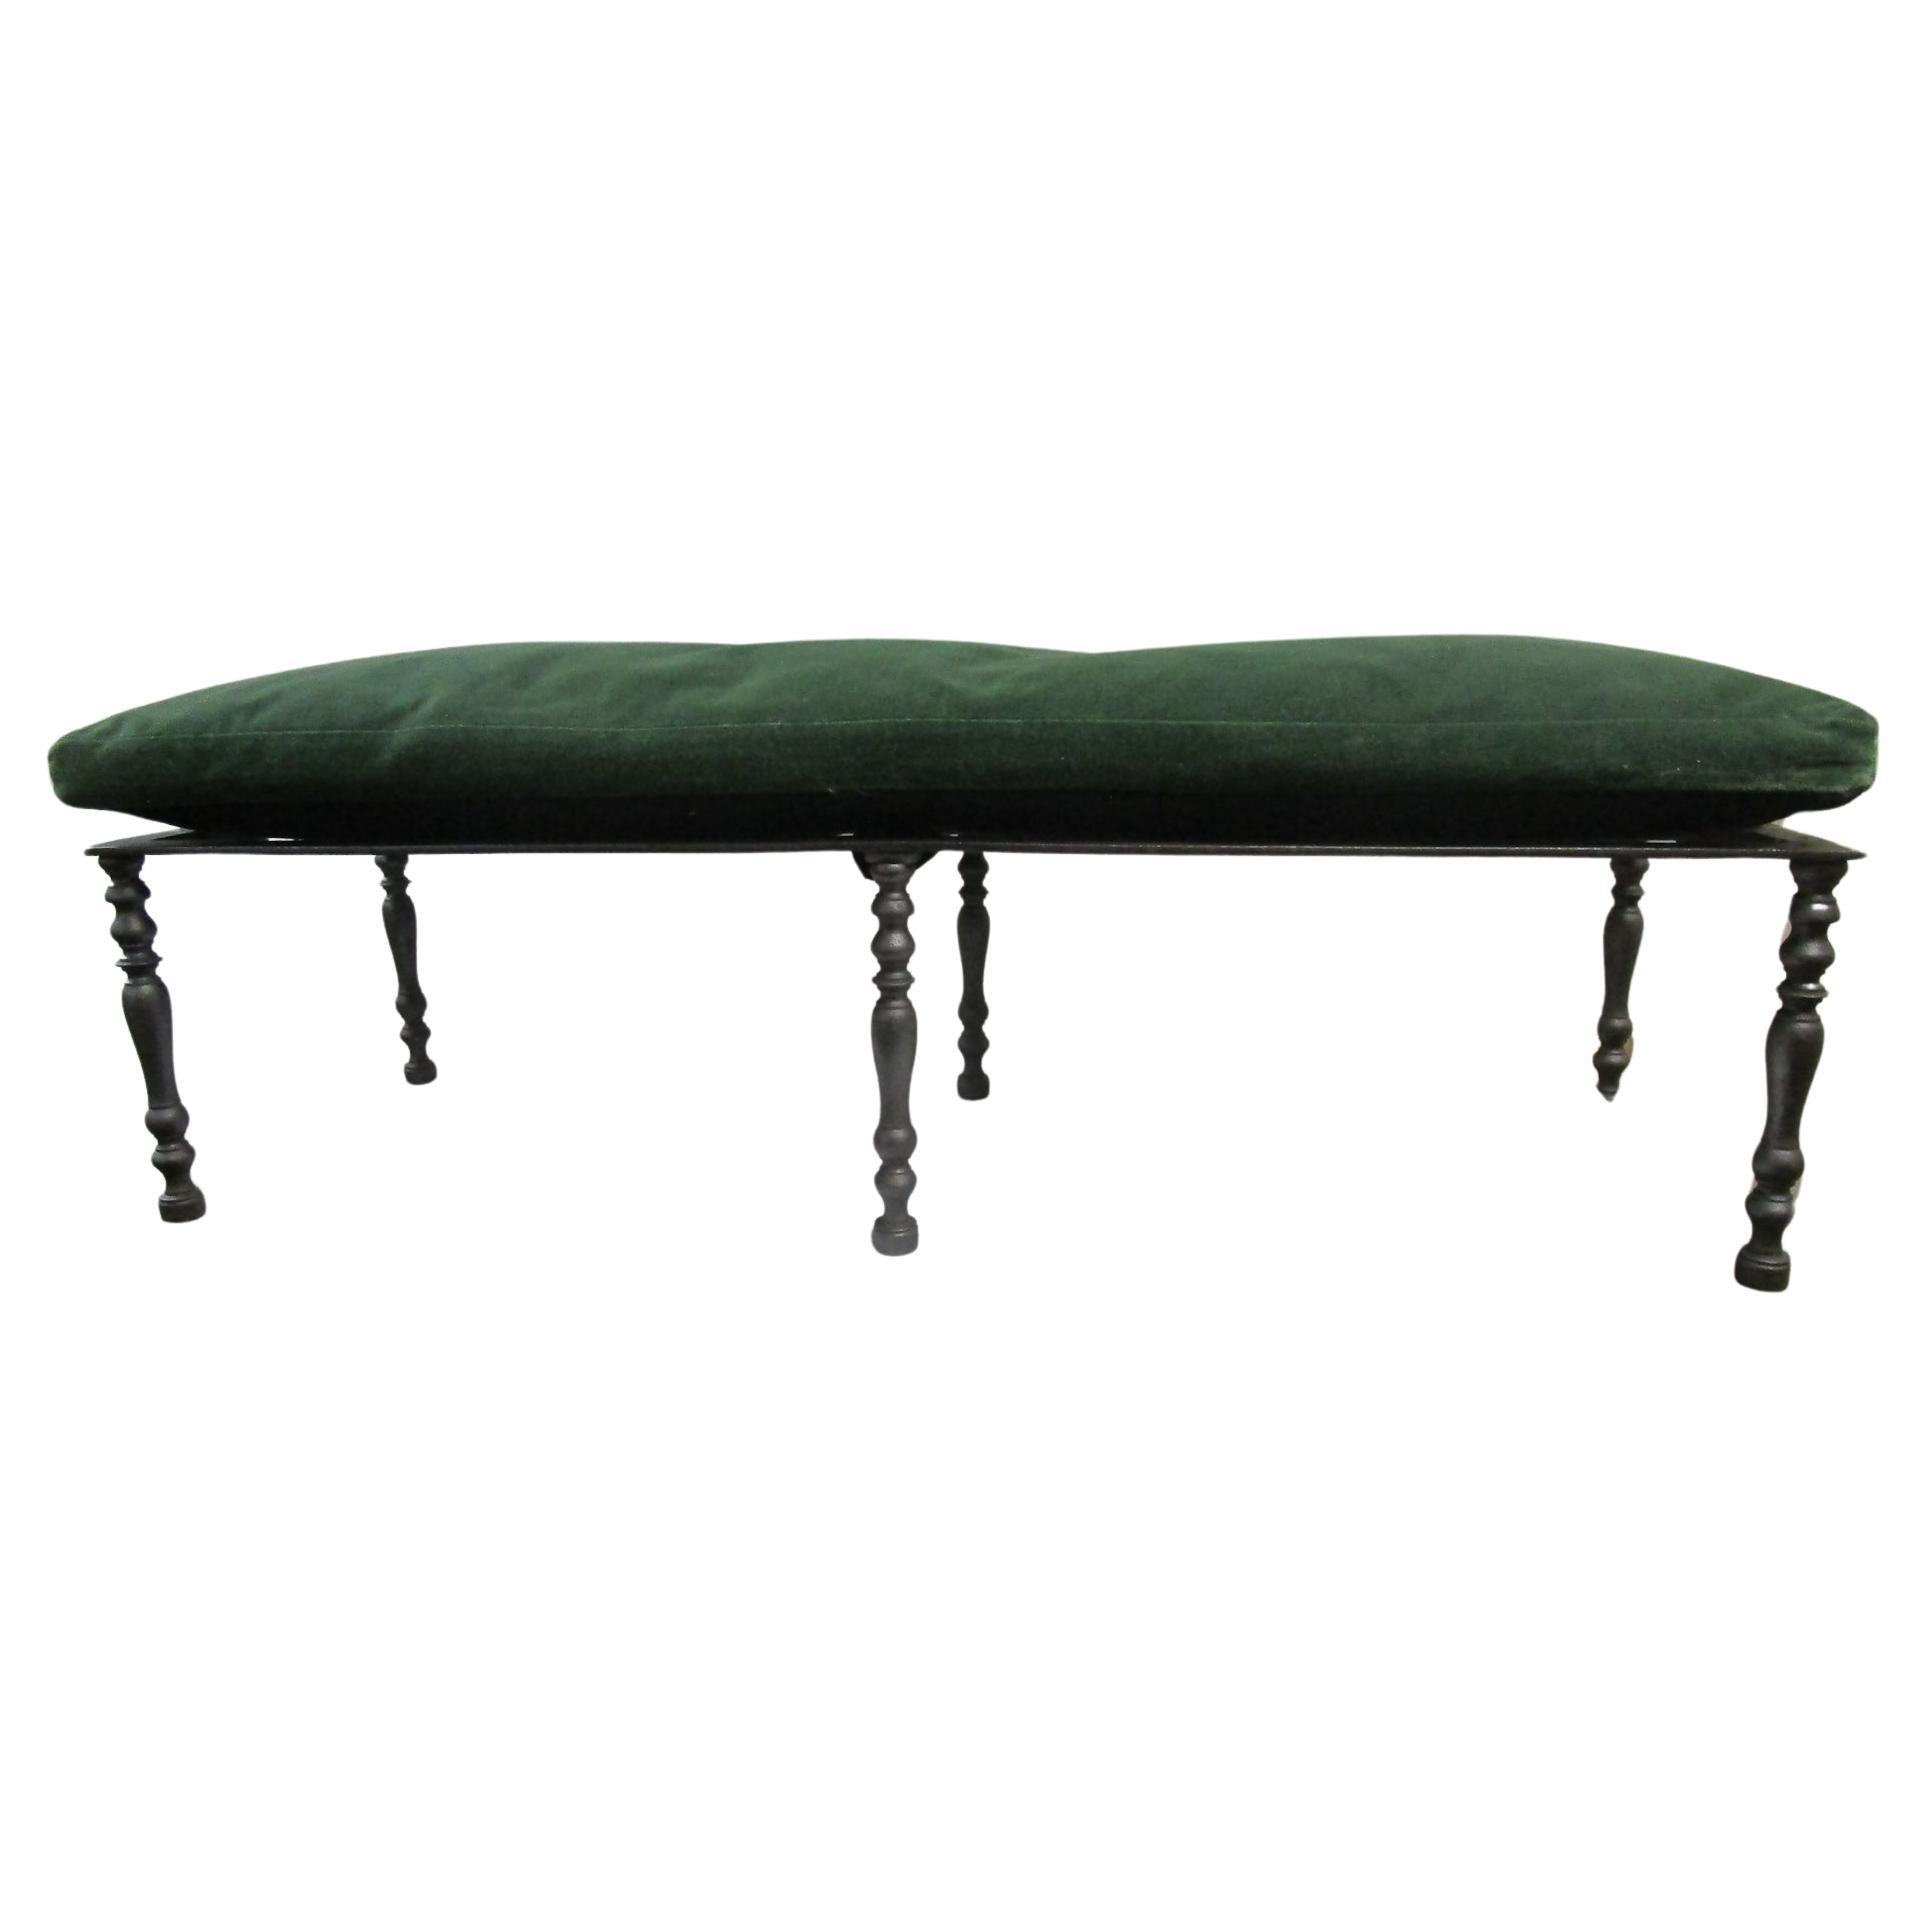 19thc Cast Iron Low English Garden or Fireplace Bench with Velvet Custom Cushion